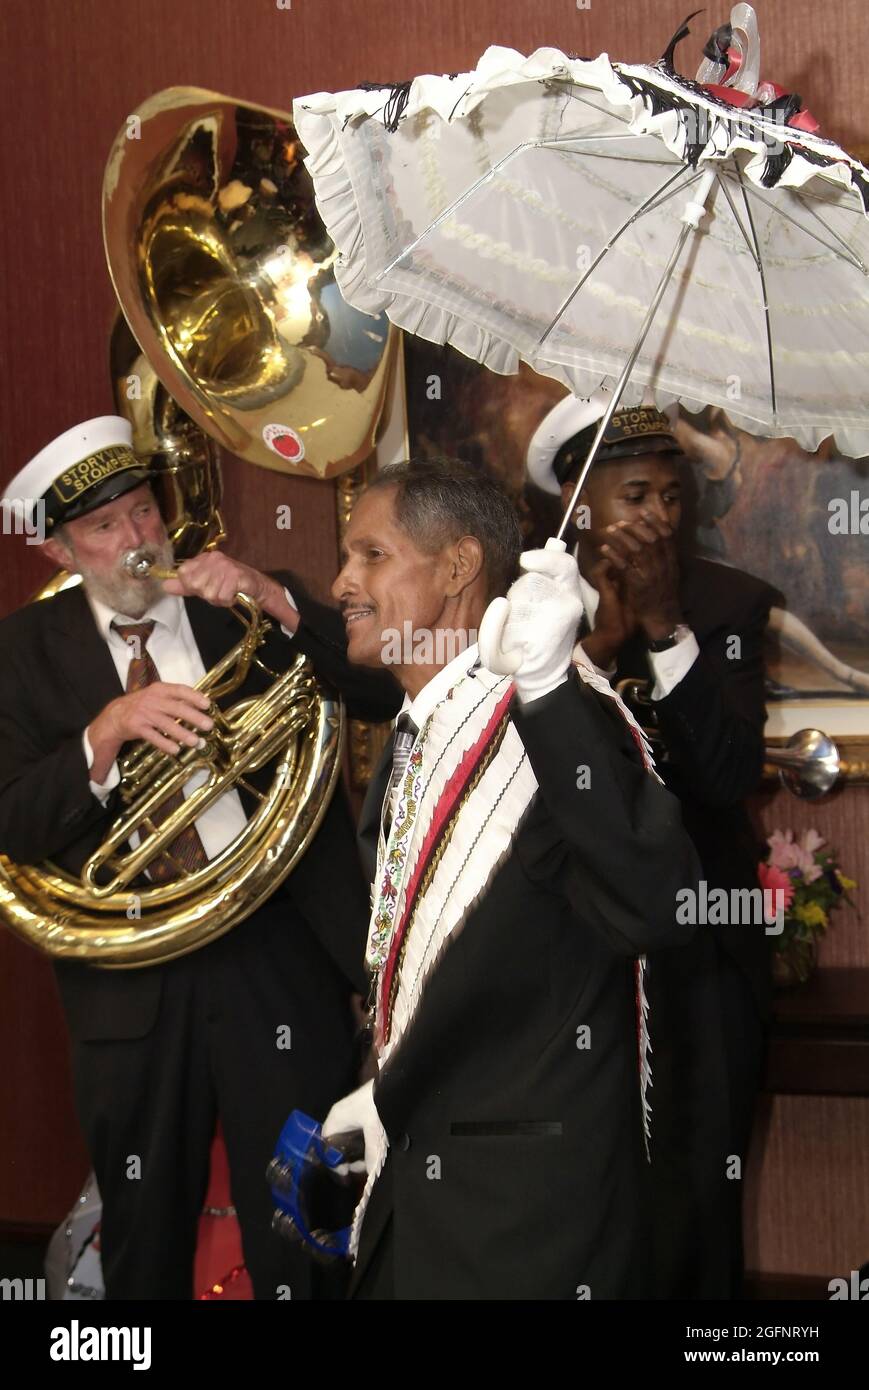 SAINT LOUIS, UNITED STATES - Jul 02, 2009: A vertical shot of Storyville Stompers jazz band performing at a celebration in Missouri Stock Photo